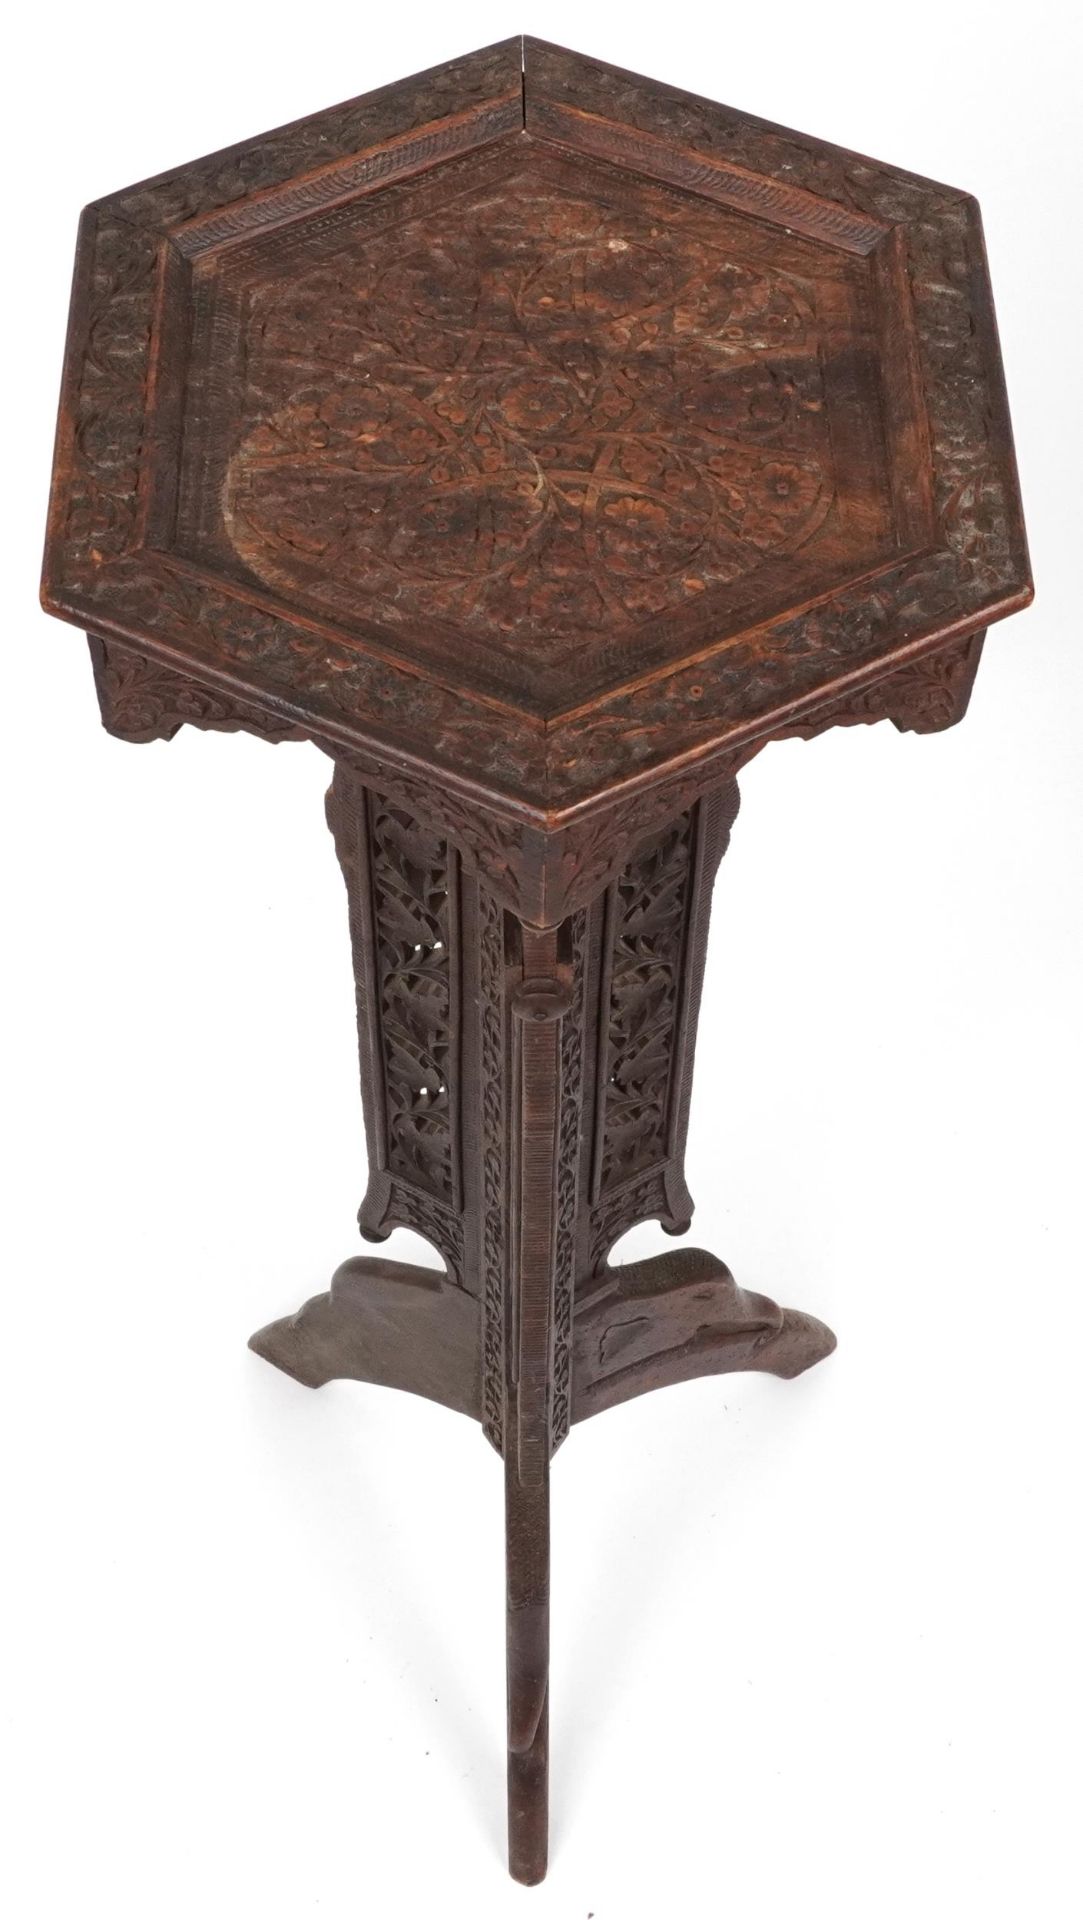 Anglo Indian plant stand profusely carved with flowers and foliage, 100cm high - Image 2 of 3